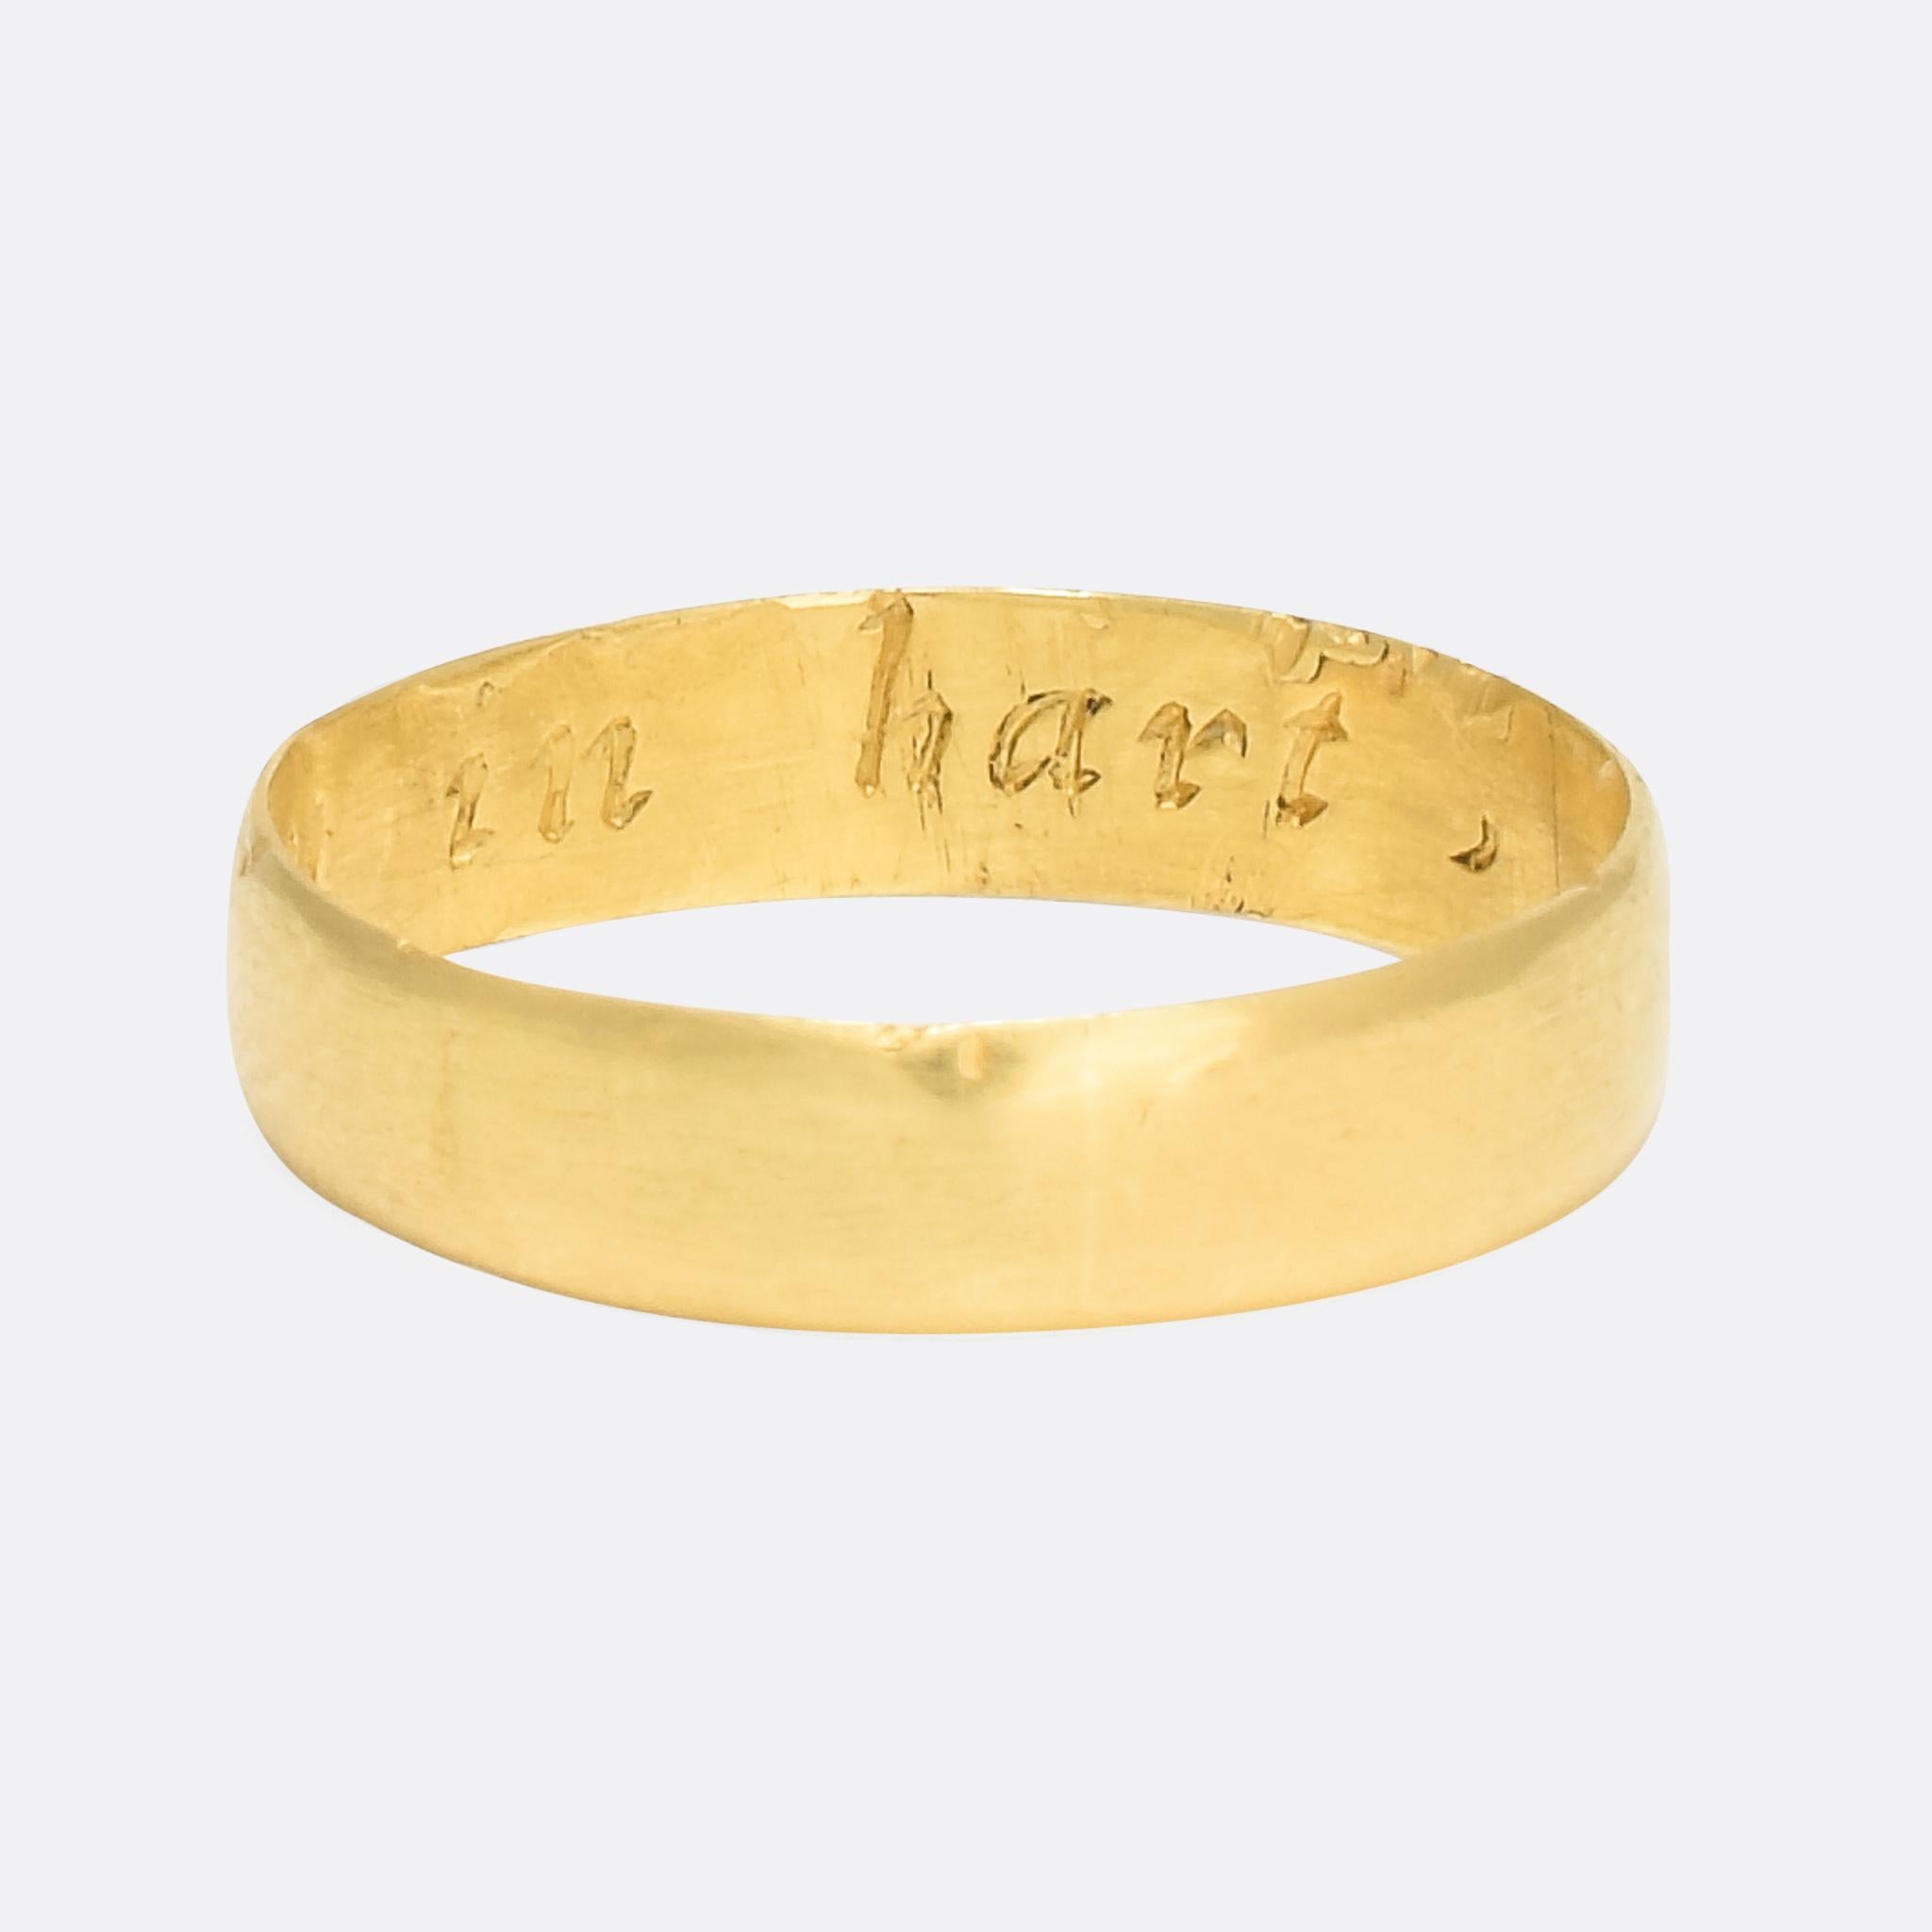 An exceptional early gold posy ring dating from circa 1700. The inscription to the inner band reads: 